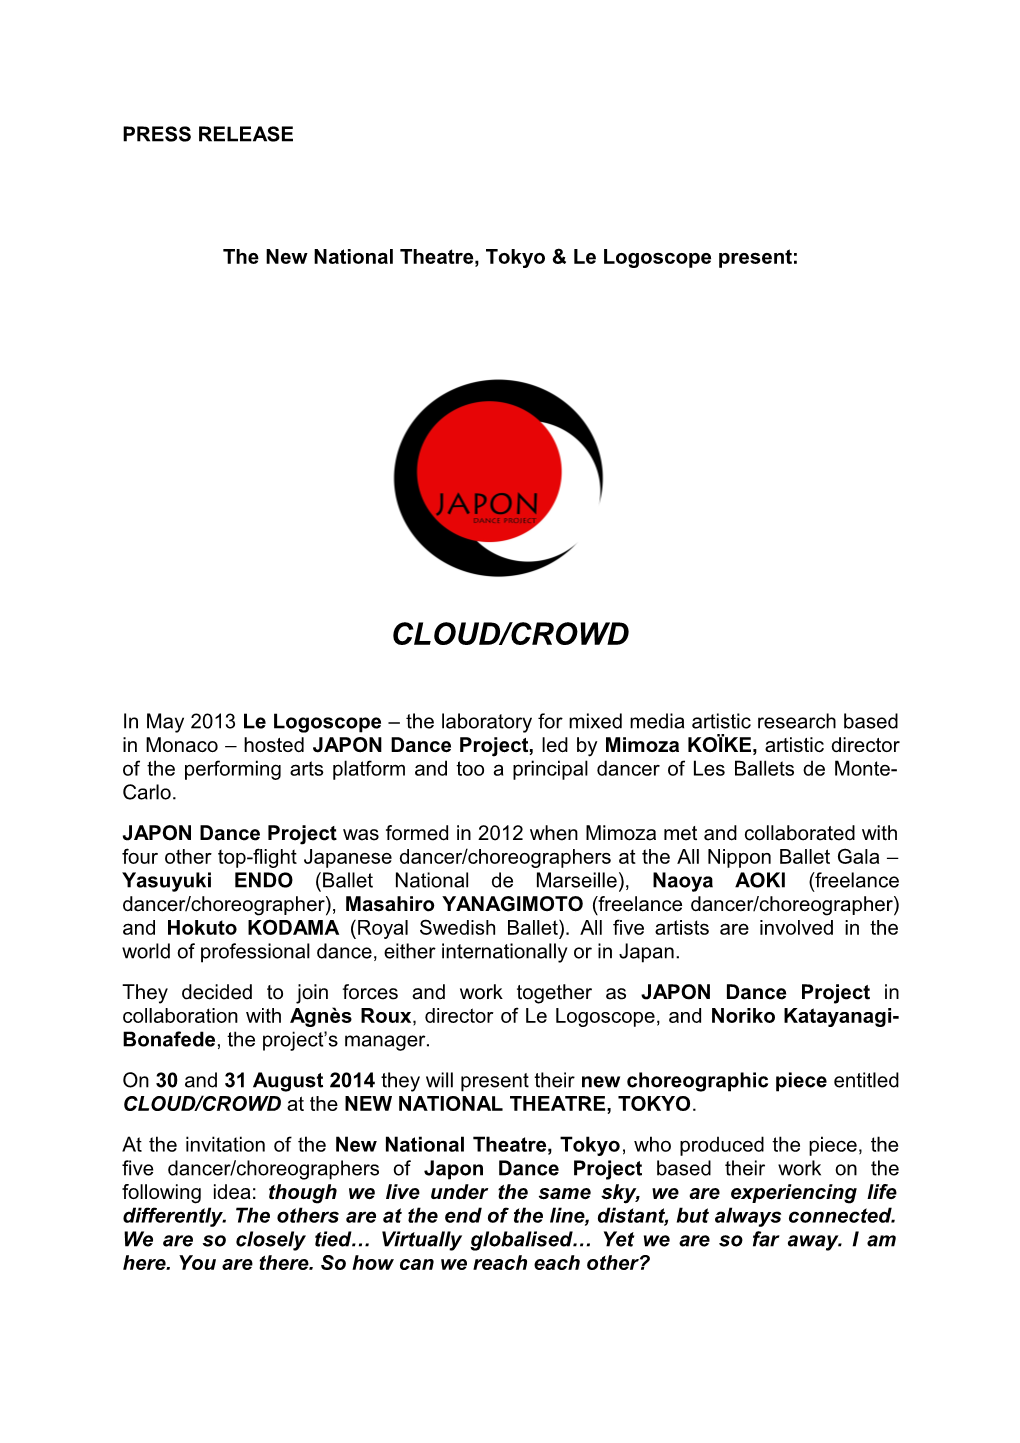 The New National Theatre, Tokyo & Le Logoscope Present